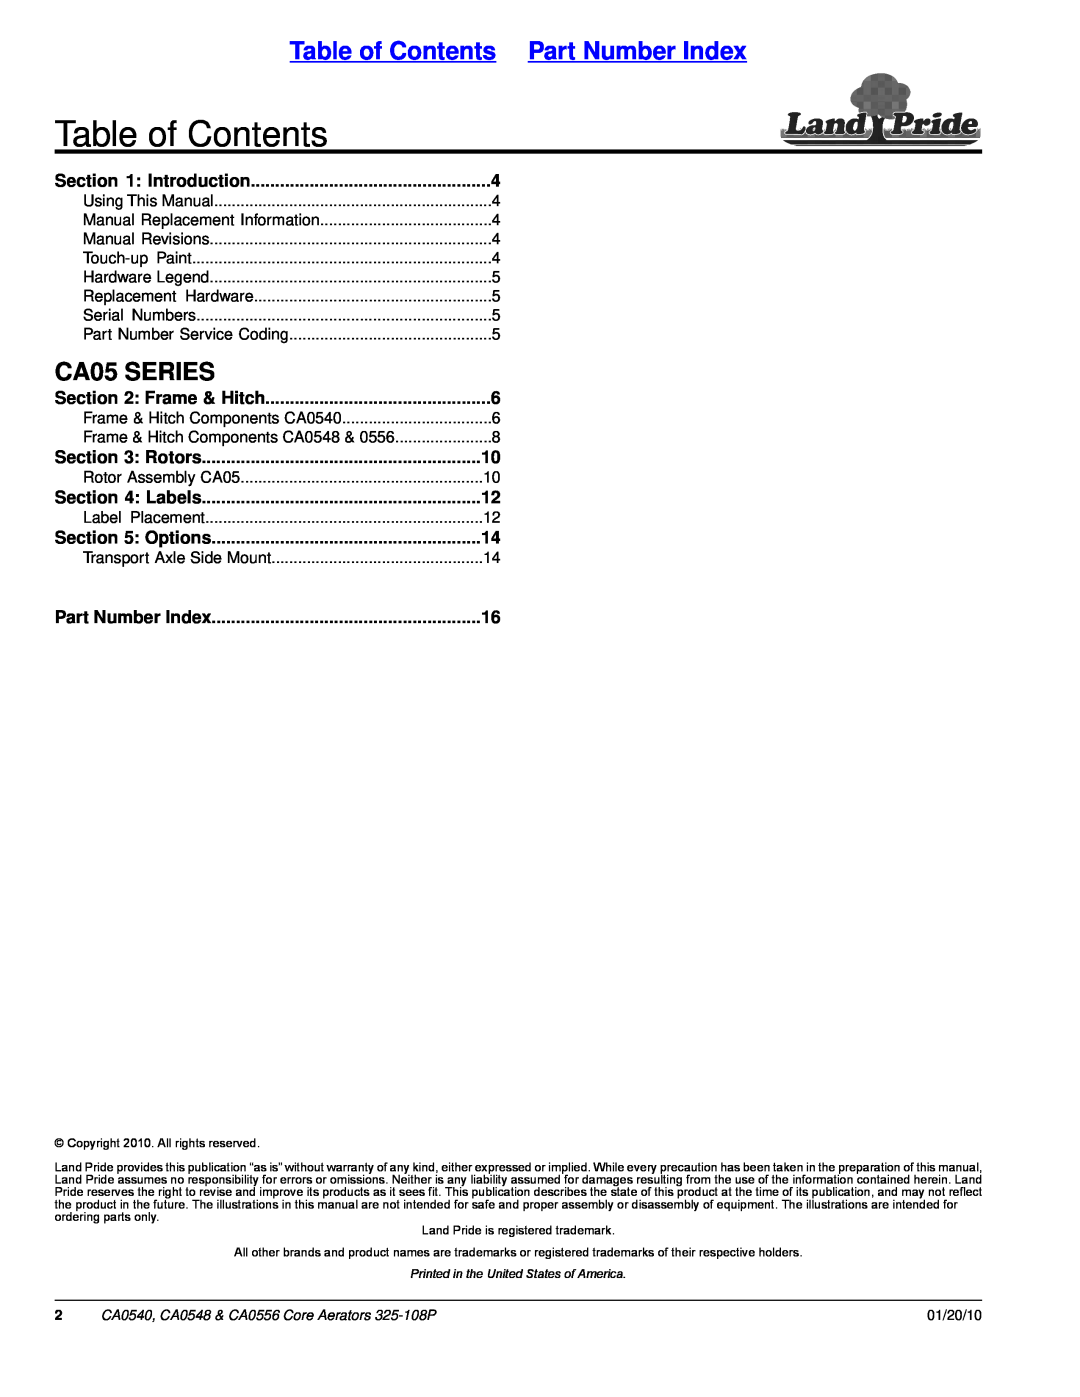 Land Pride CA0556 manual CA05 SERIES, Table of Contents Part Number Index, Introduction, Frame & Hitch, Rotors, Labels 